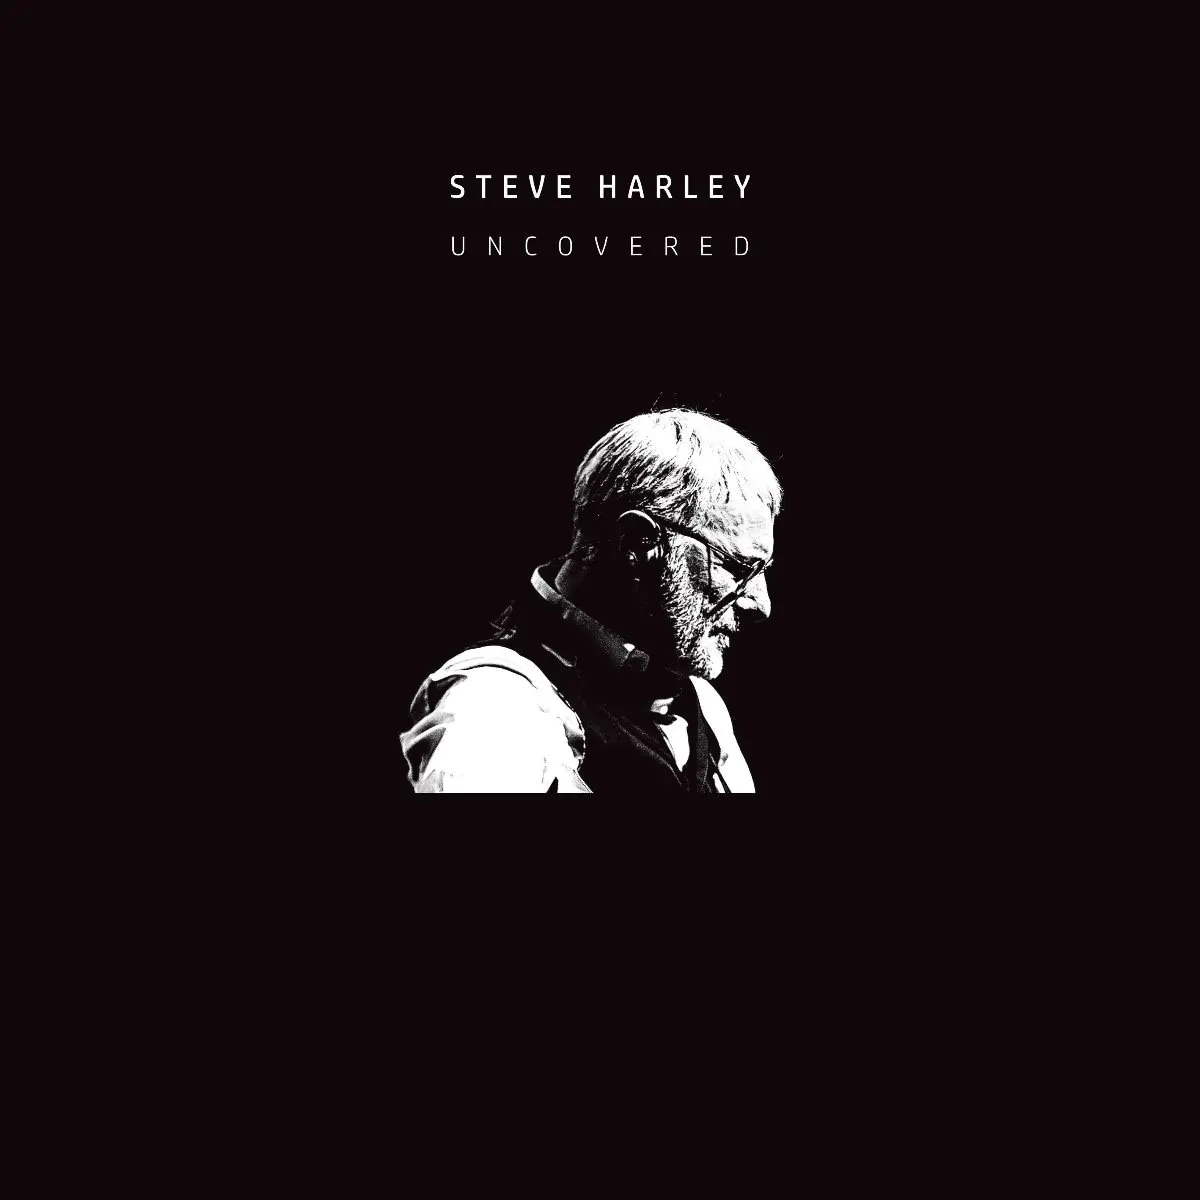 STEVE HARLEY Releases video for ‘I’ve Just Seen A Face’ from his forthcoming ‘Uncovered’ album